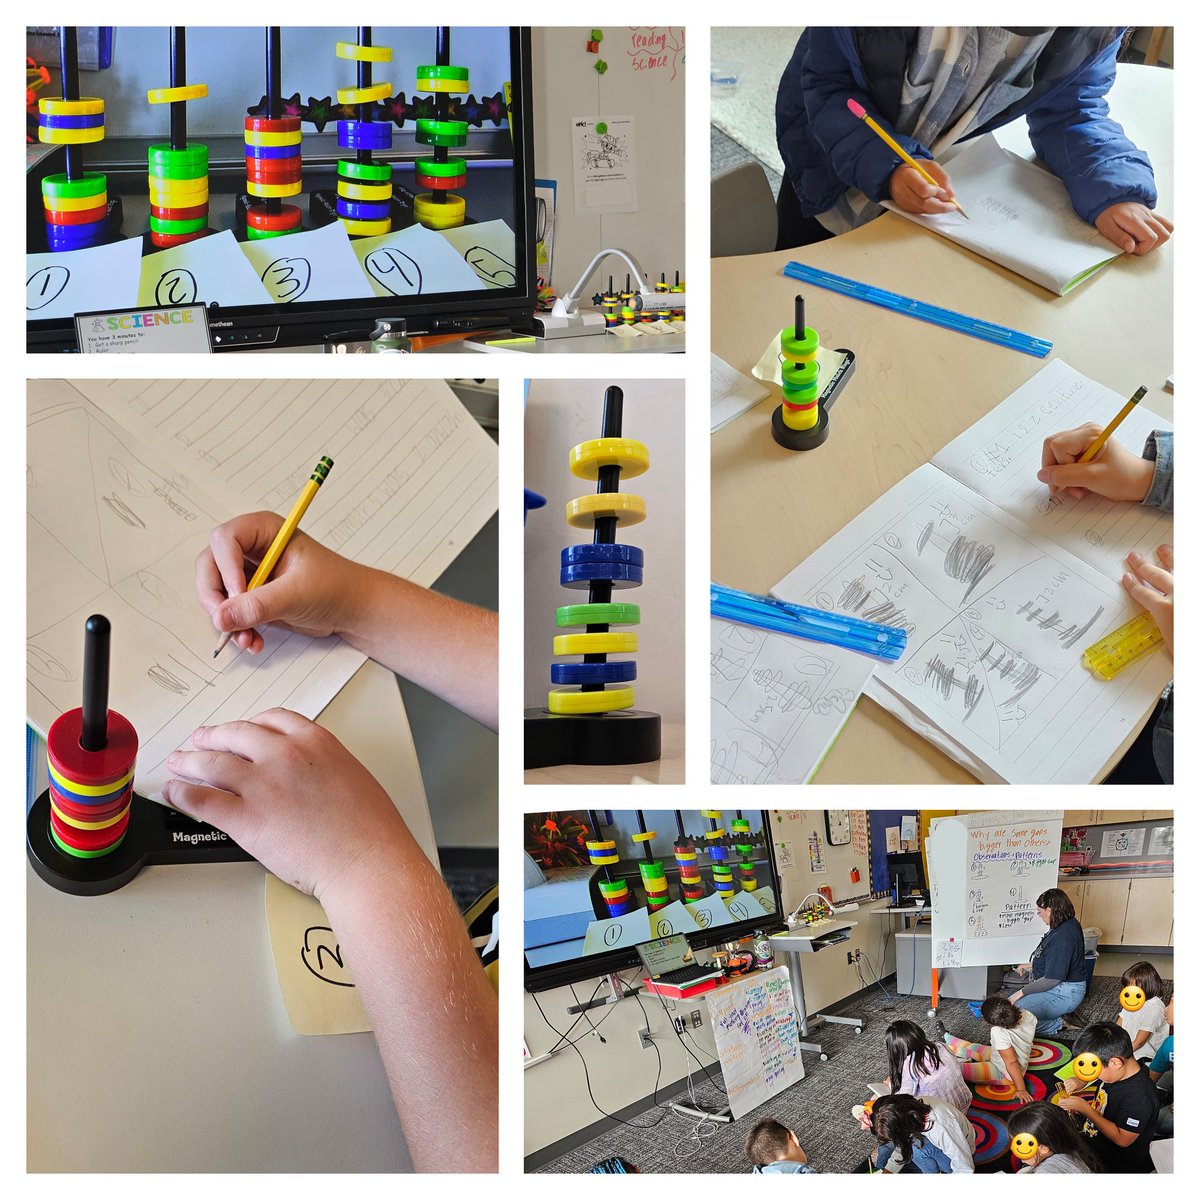 3rd graders @SartoriSTEM are learning about noncontact forces. Recently, students made & compared various configurations on magnet toys, measured gap size & explained why gap sizes would vary. Up next: Use this conclusion to figure out configuration to launch top magnet highest!